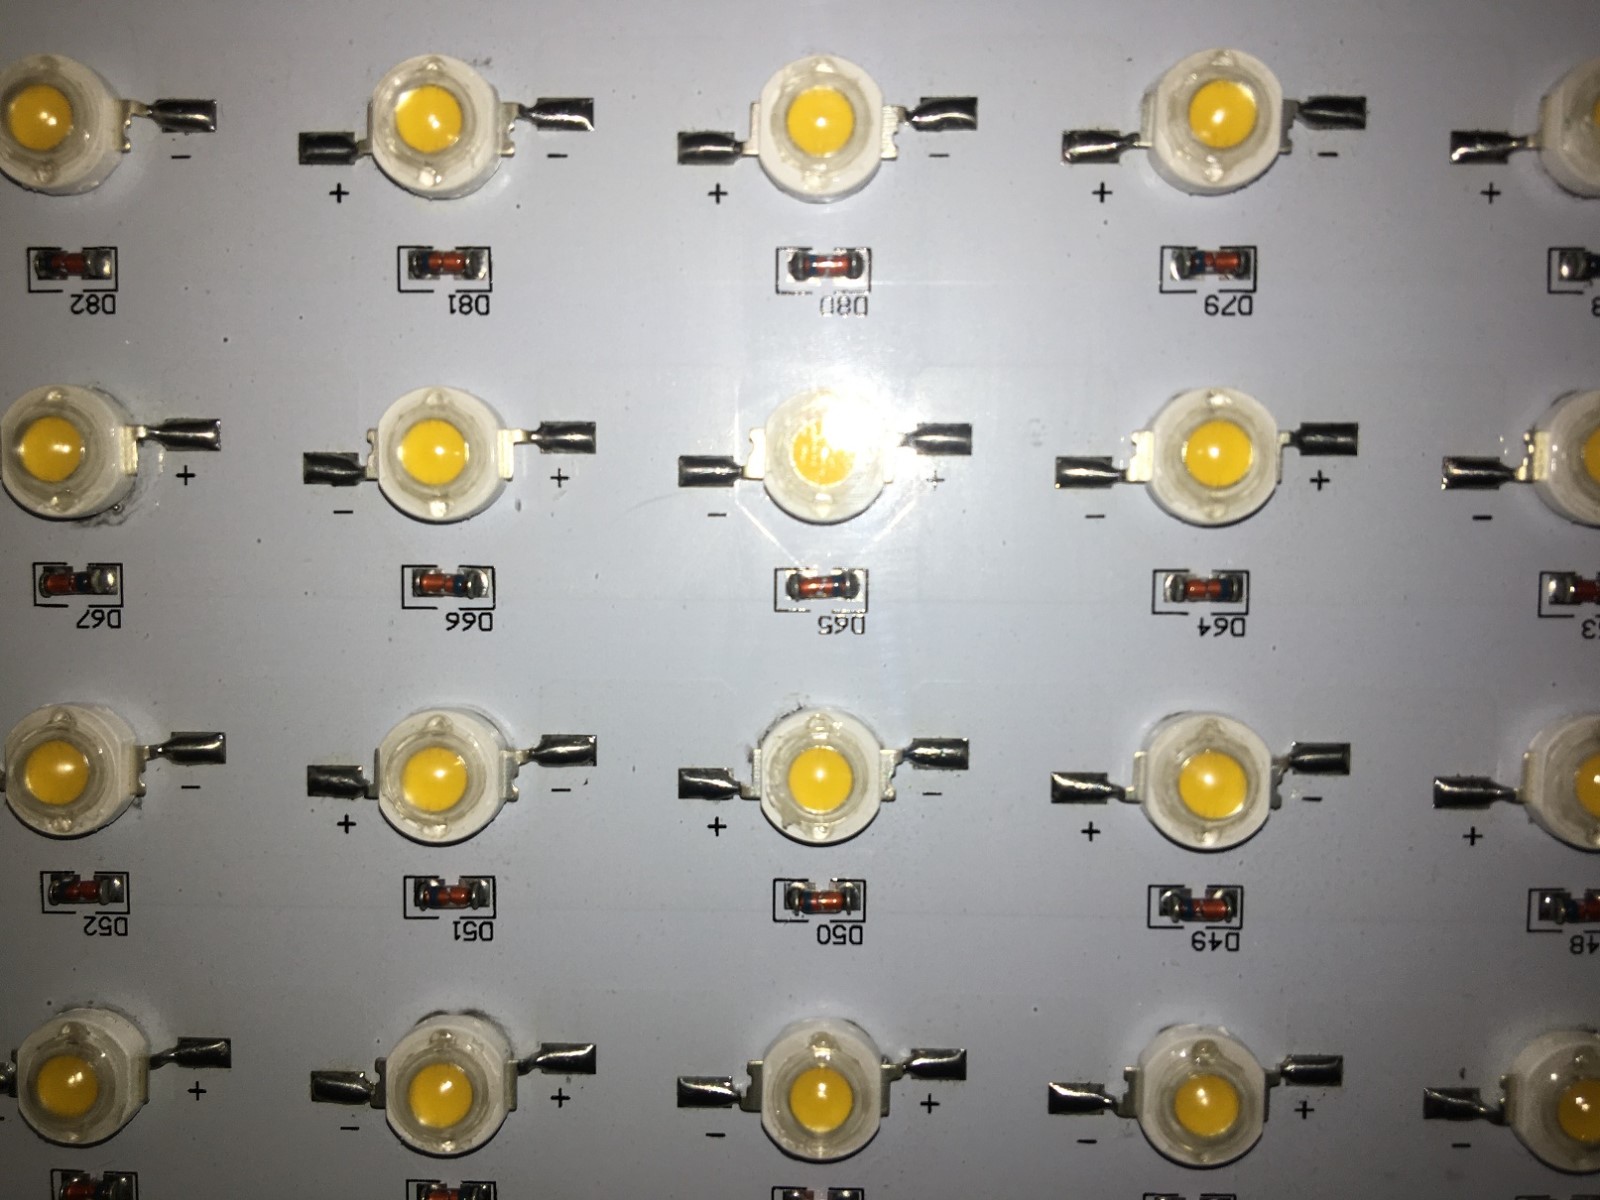 600w led grow lights which use 5w leds, iron housing